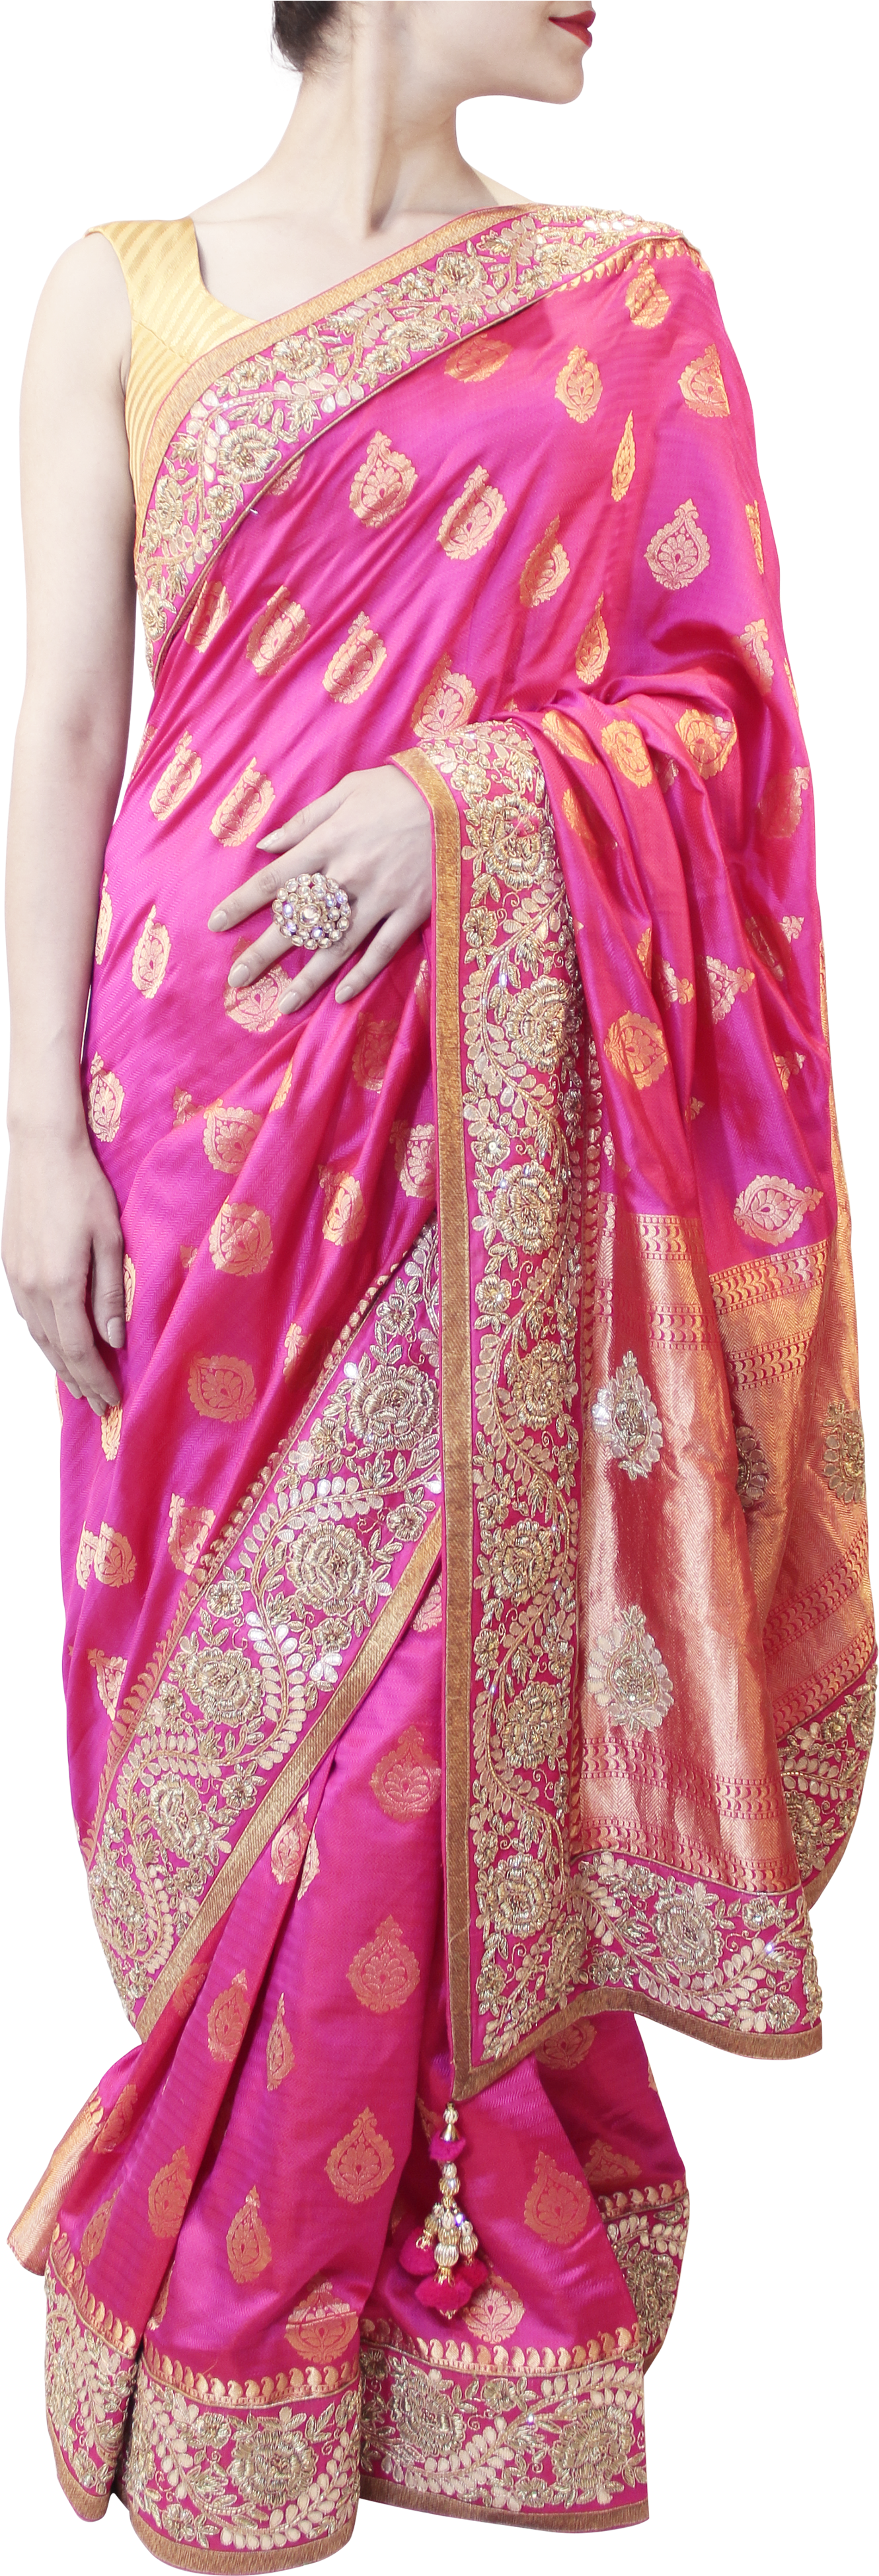 Elegant Pink Sareewith Golden Embroidery PNG image